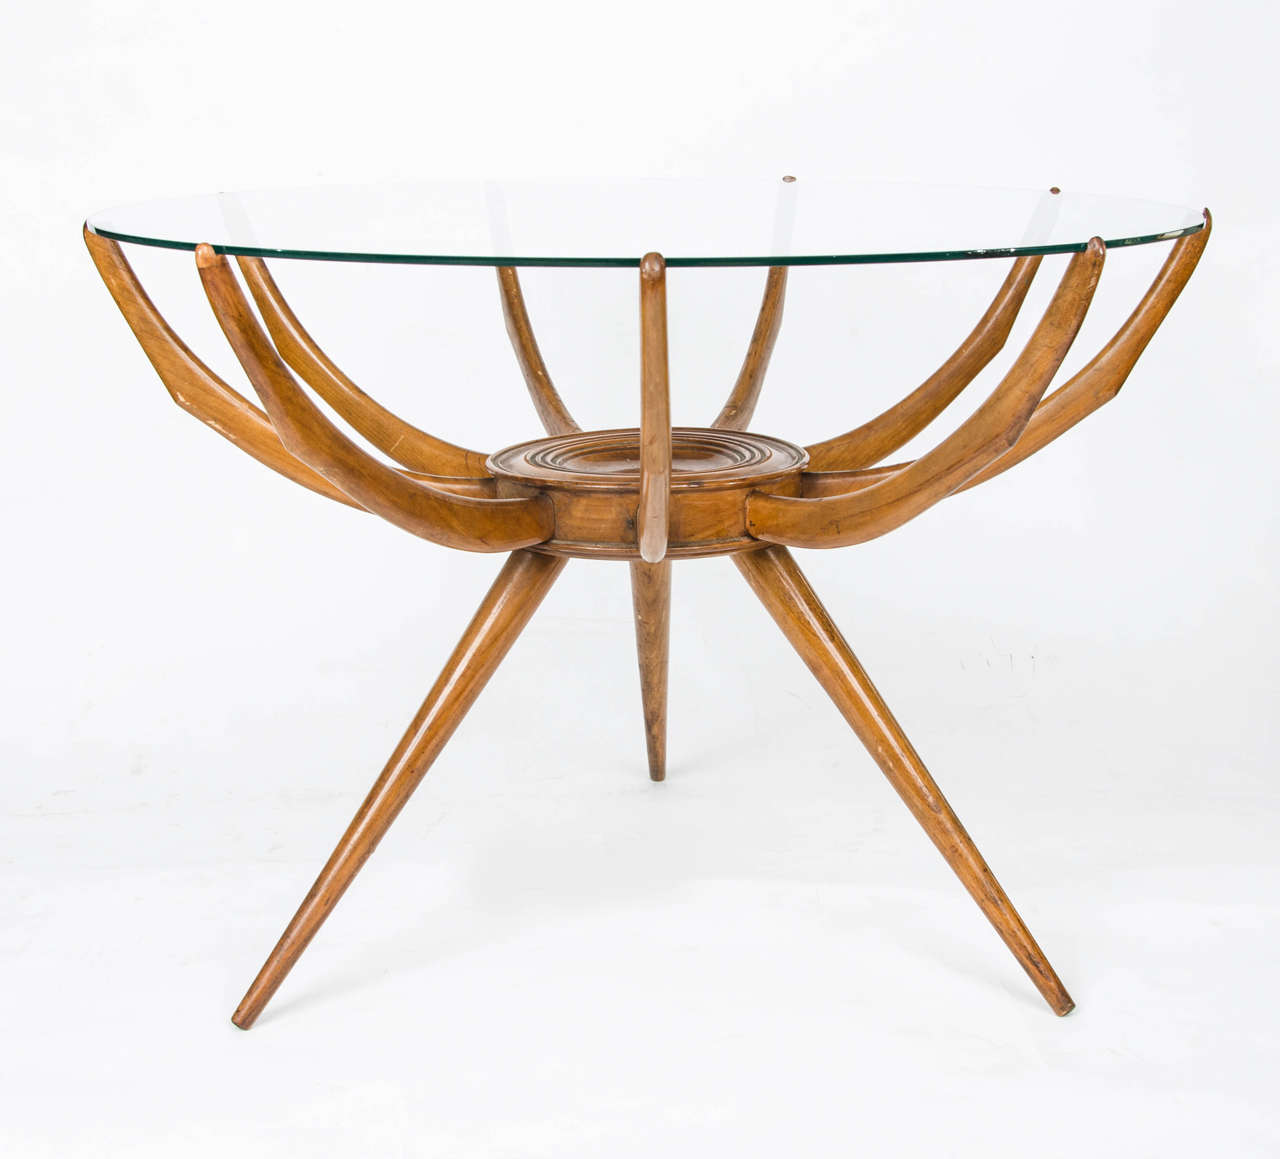 Circular 'spider' table by Carlo di Carli.
Code: FT418.
1950s Italian coffee table of carved wood frame with nine arms supporting a glass top, standing on three splayed tapering legs.